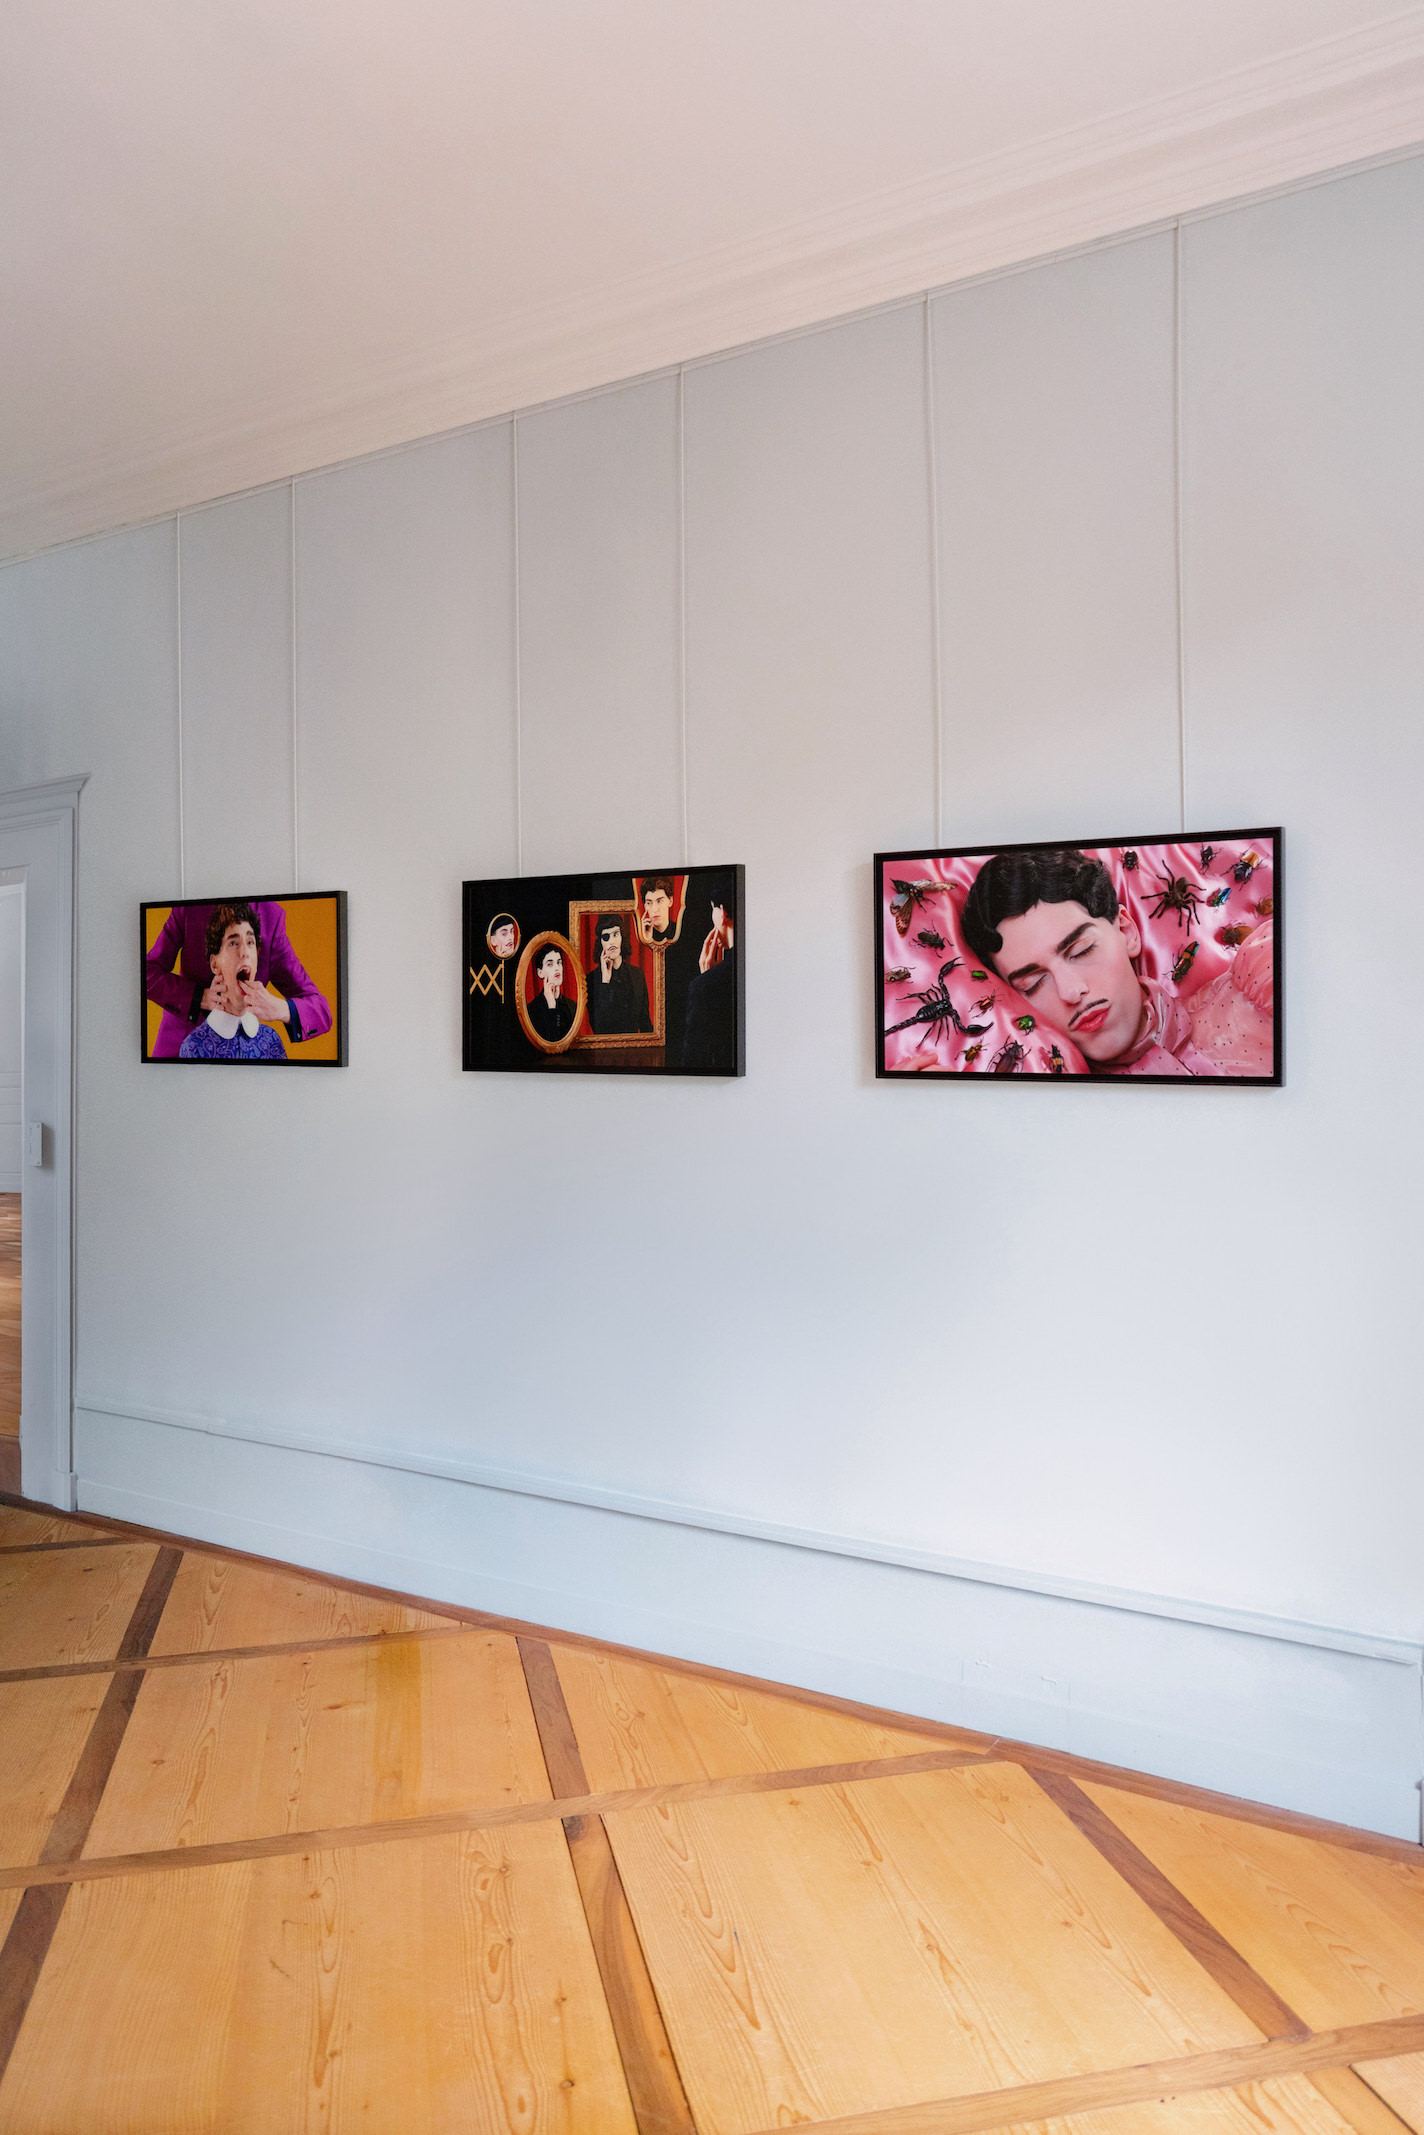 View of the exhibition Prix Voltaire de la Photographie, 2021. Nuno Roque - « Pupil & Master (with The Boy and The Joker) », « Self-Reflections (with The Villain, The Prince, The Joker and The Boy) », « Haters (with The Prince) » at Château de Voltaire, Ferney-Voltaire, France.